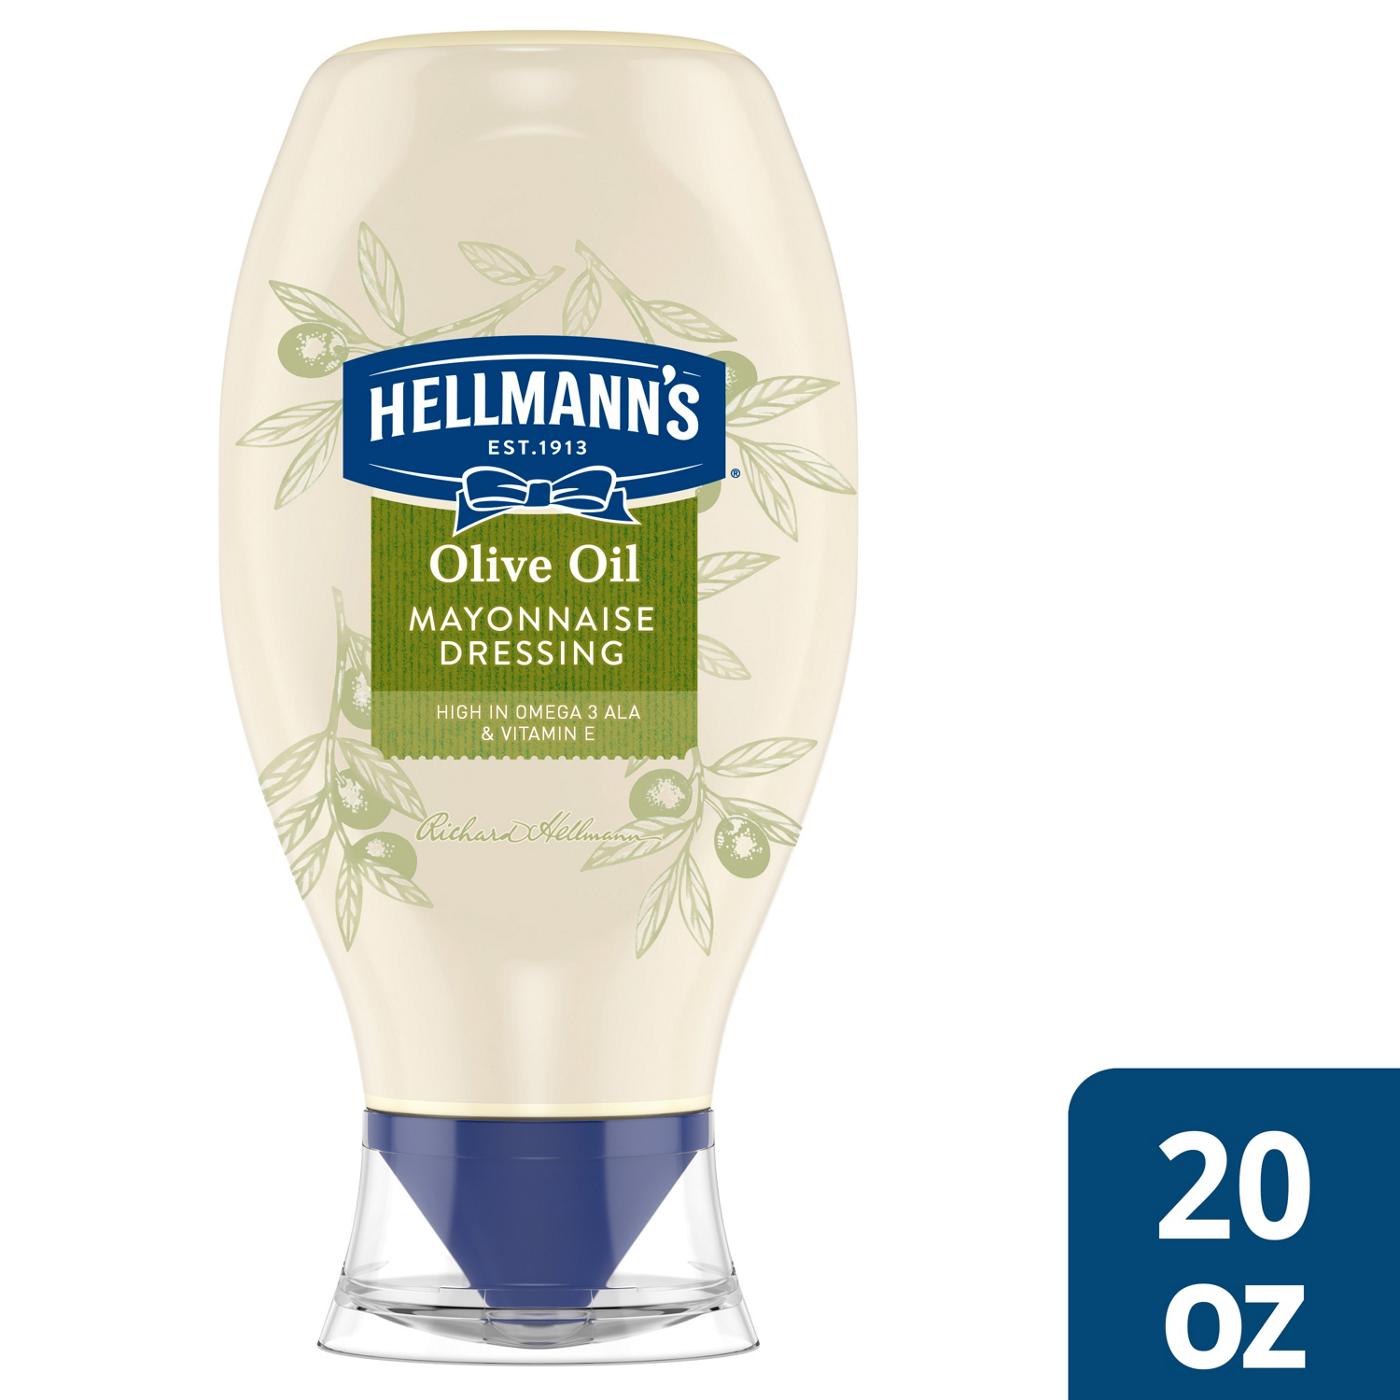 Hellmann's Mayonnaise Dressing with Olive Oil; image 2 of 2